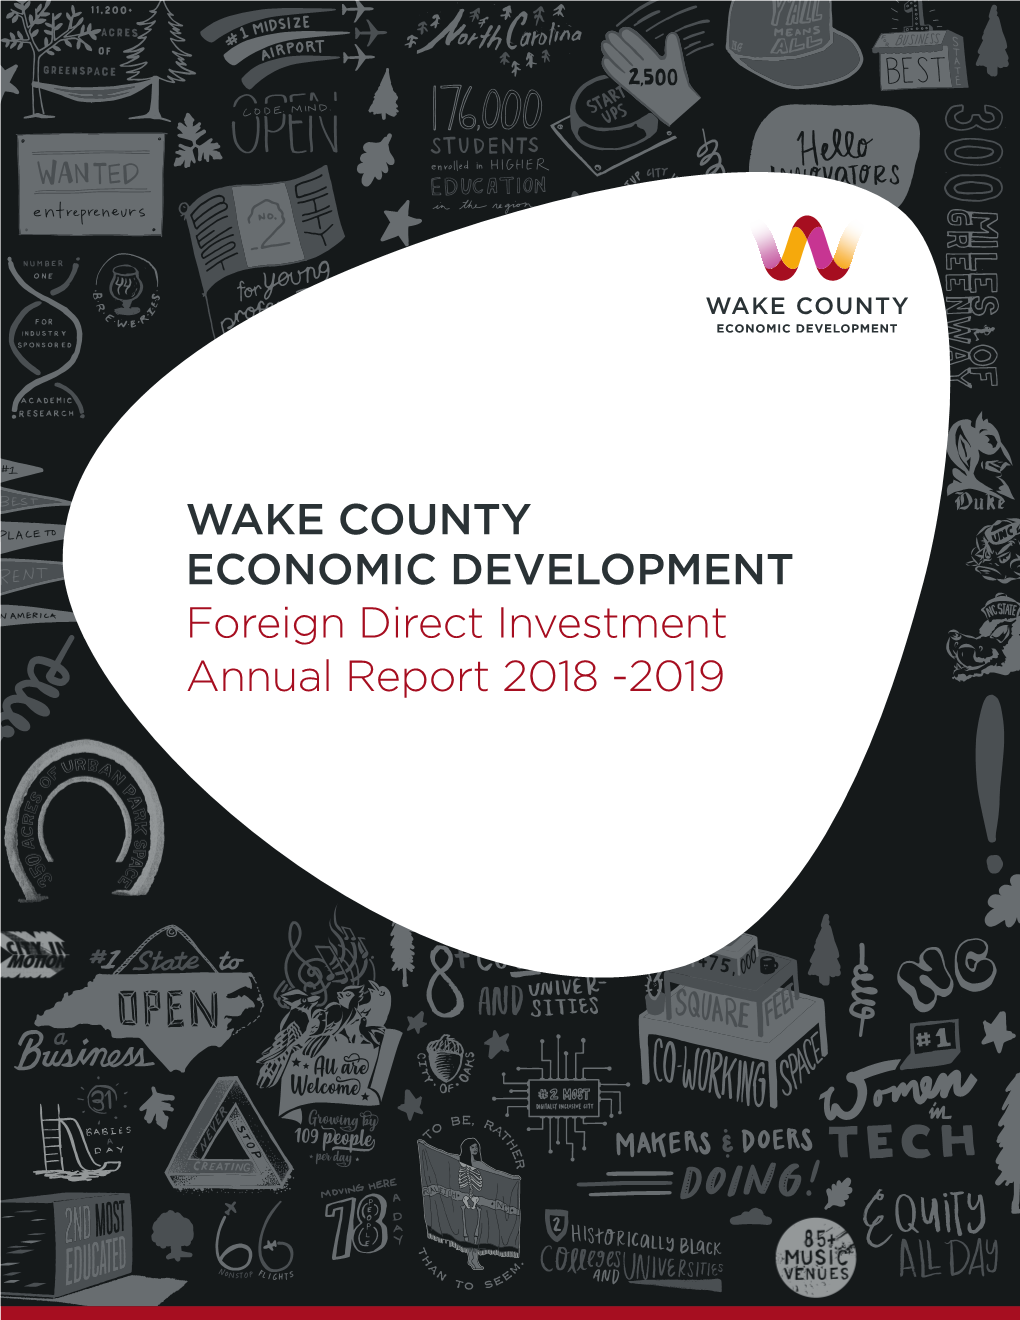 WAKE COUNTY ECONOMIC DEVELOPMENT Foreign Direct Investment Annual Report 2018 -2019 YEAR in REVIEW